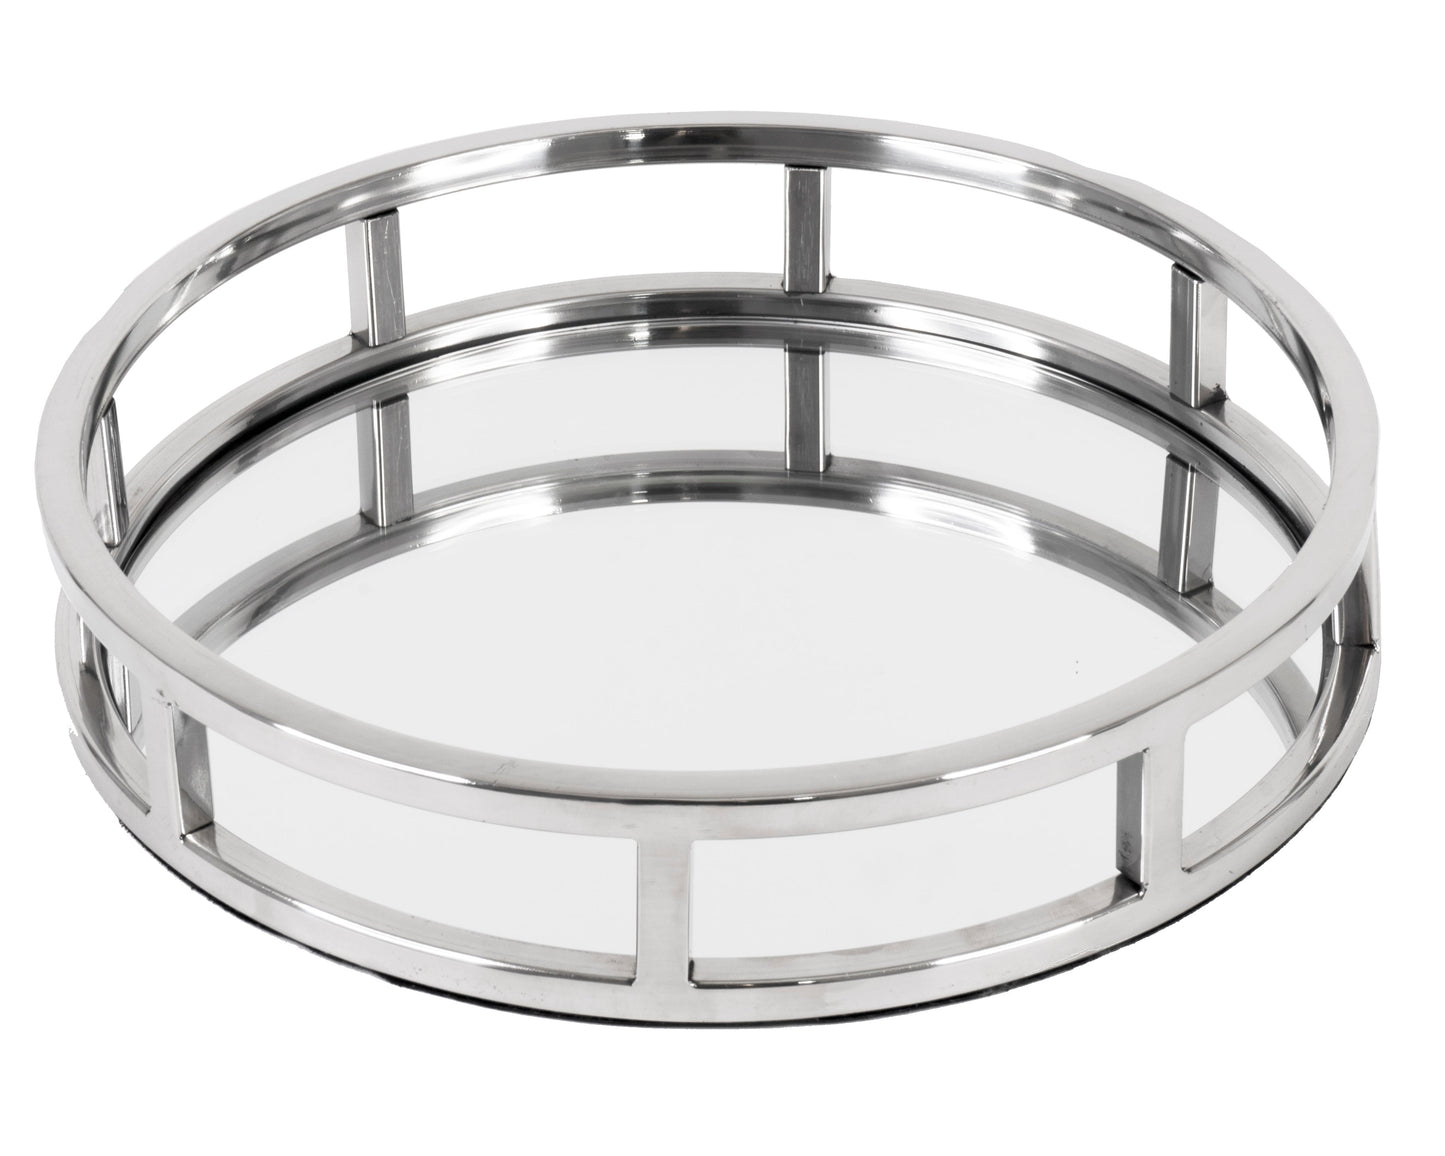 Mirror & Stainless Steel Tabletop Tray - Expo Home Decor